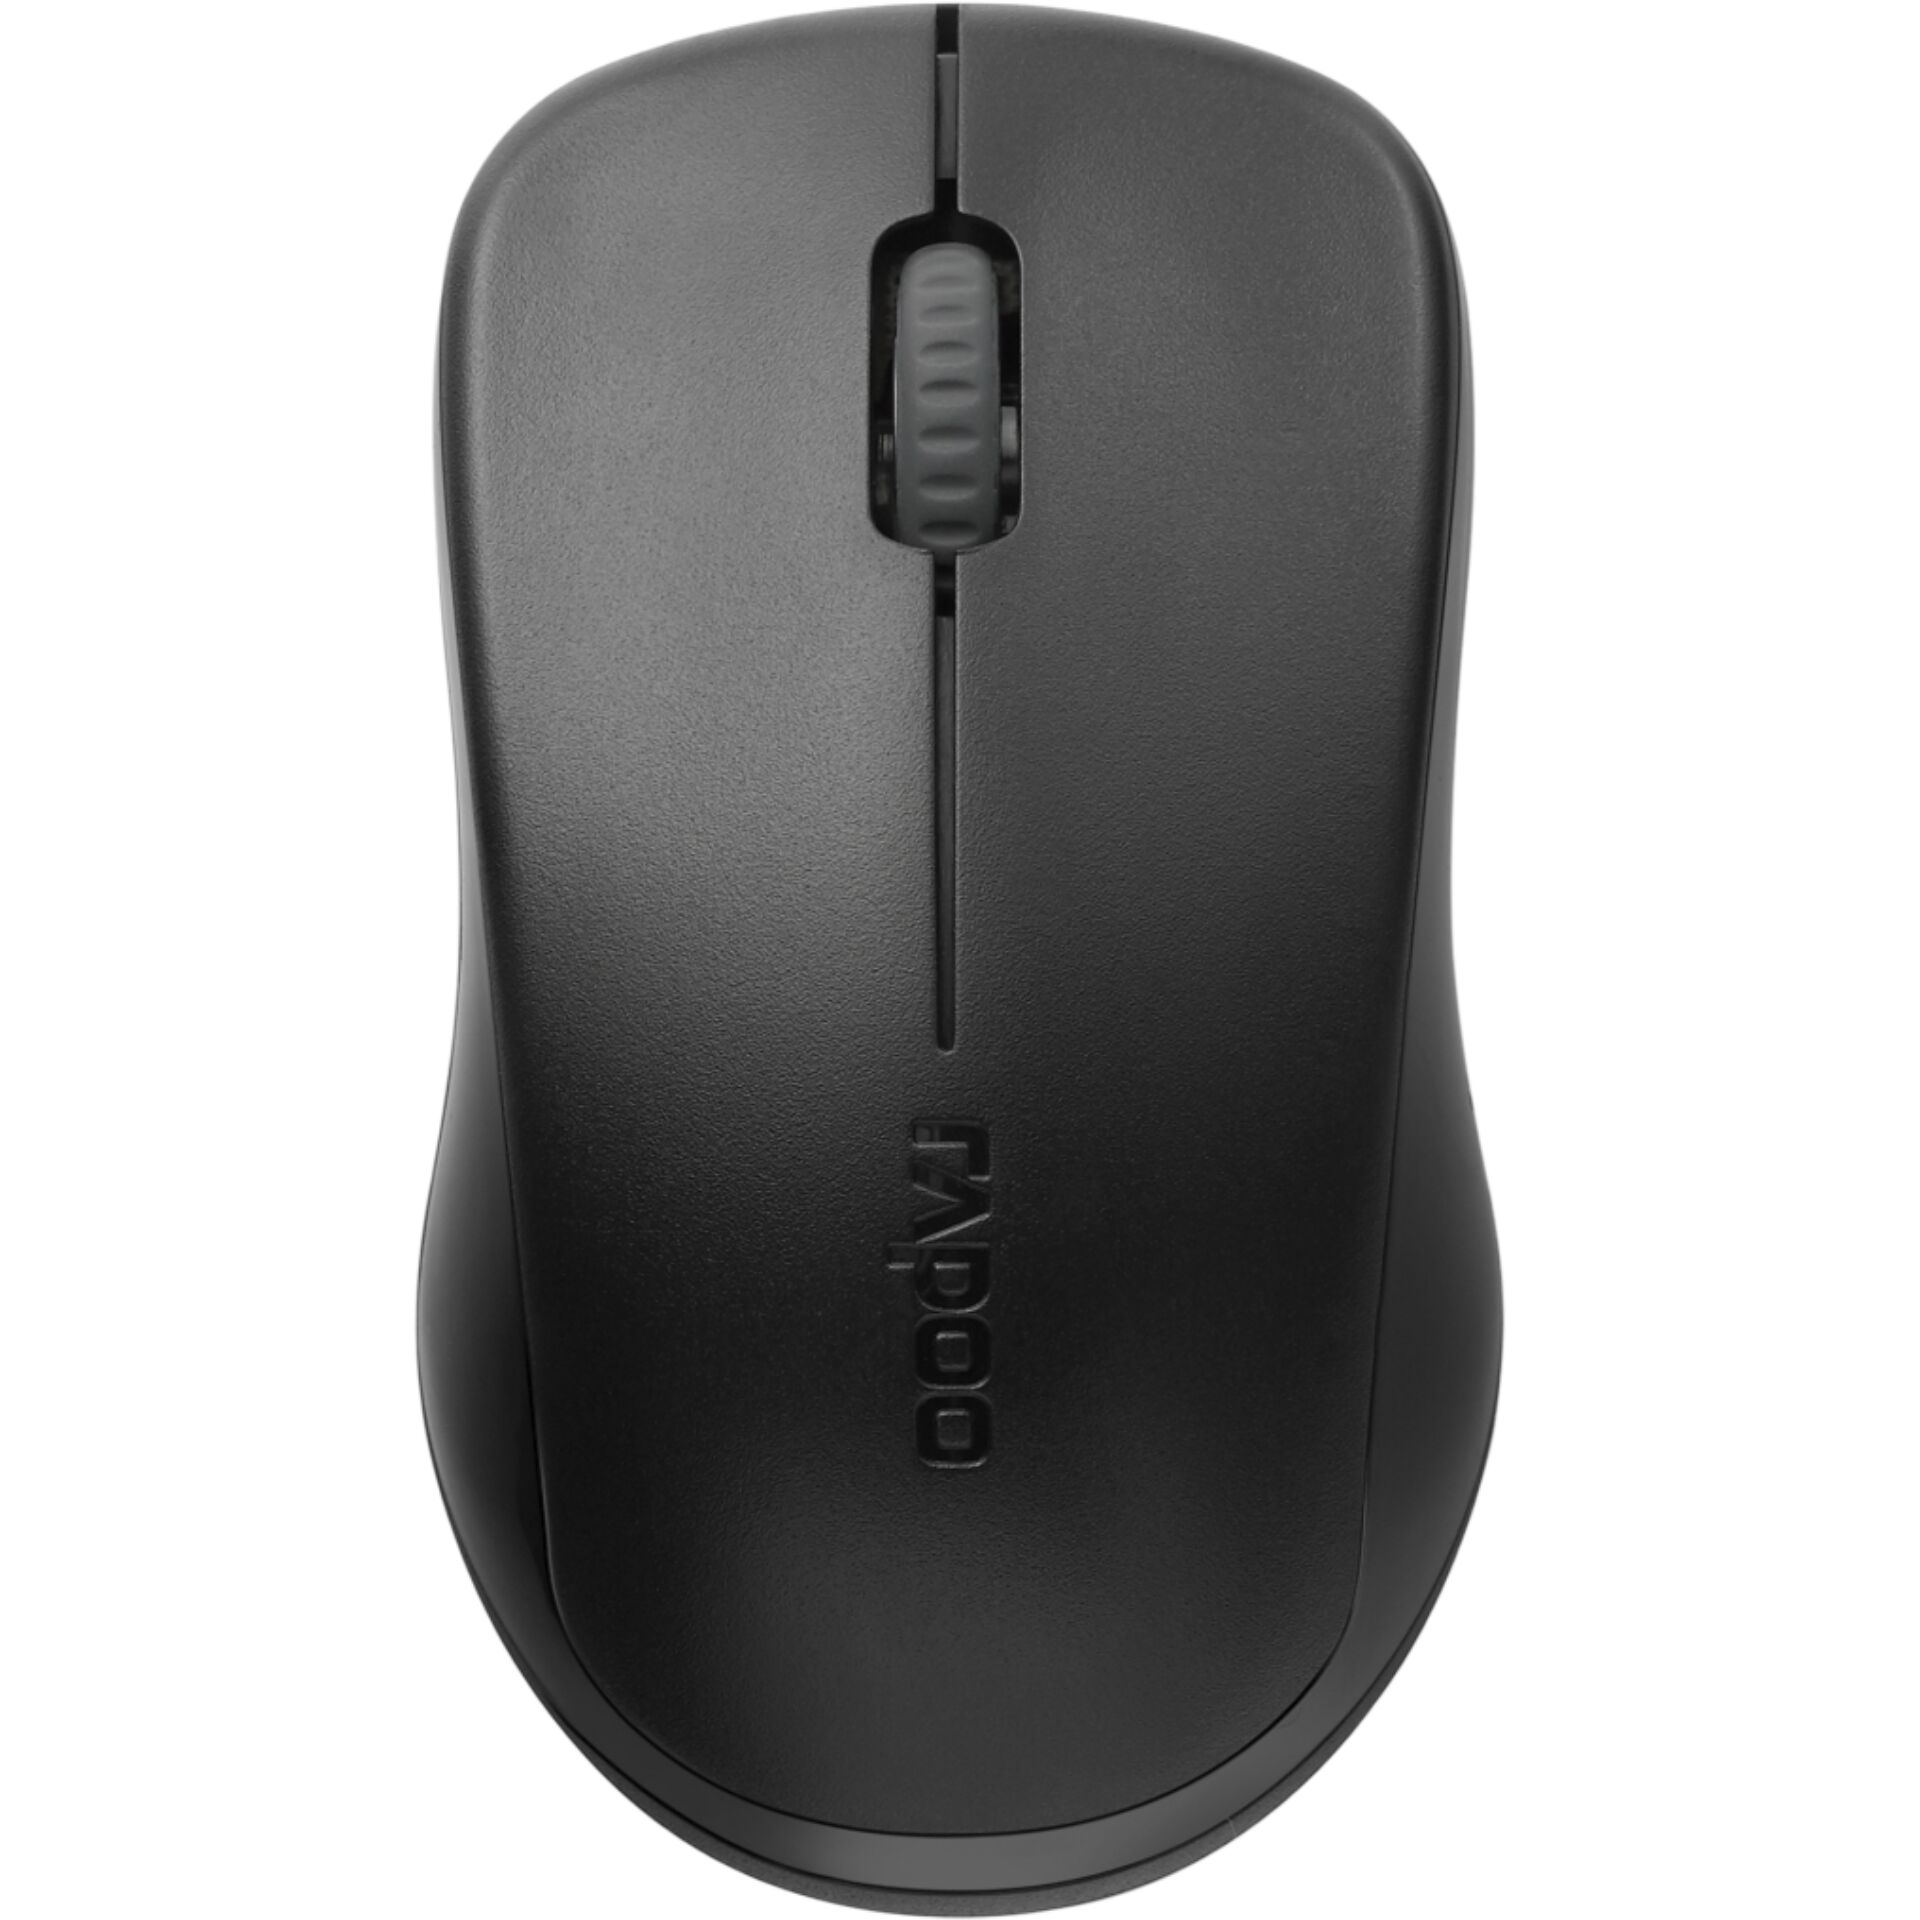 Rapoo 1680 Silent black Wireless Optical Mouses